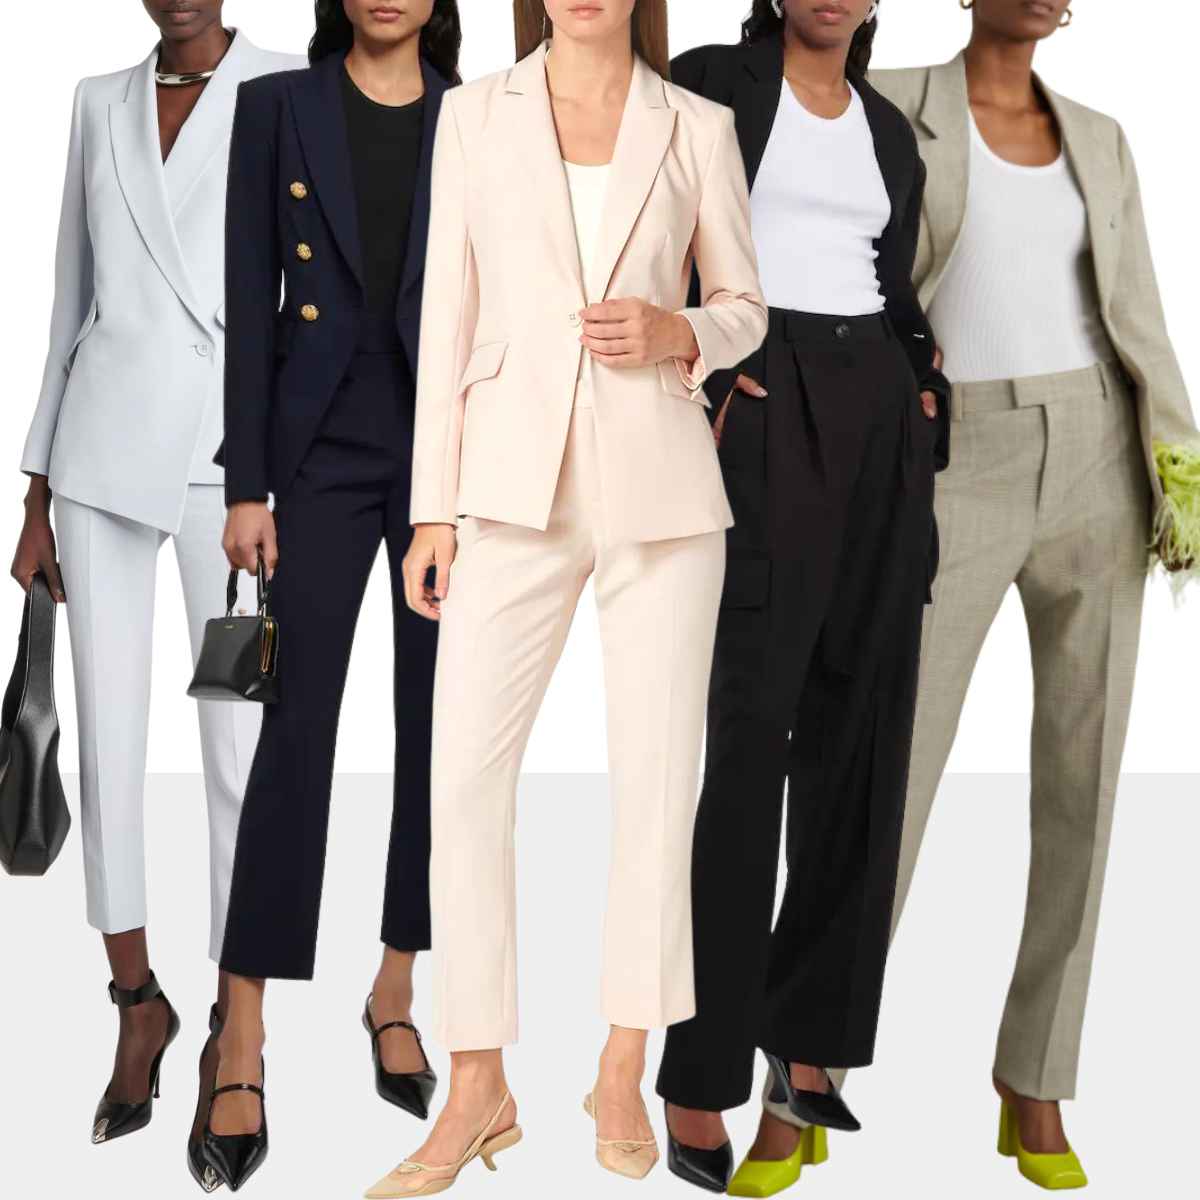 Collage of 5 women wearing various pantsuits with pumps.